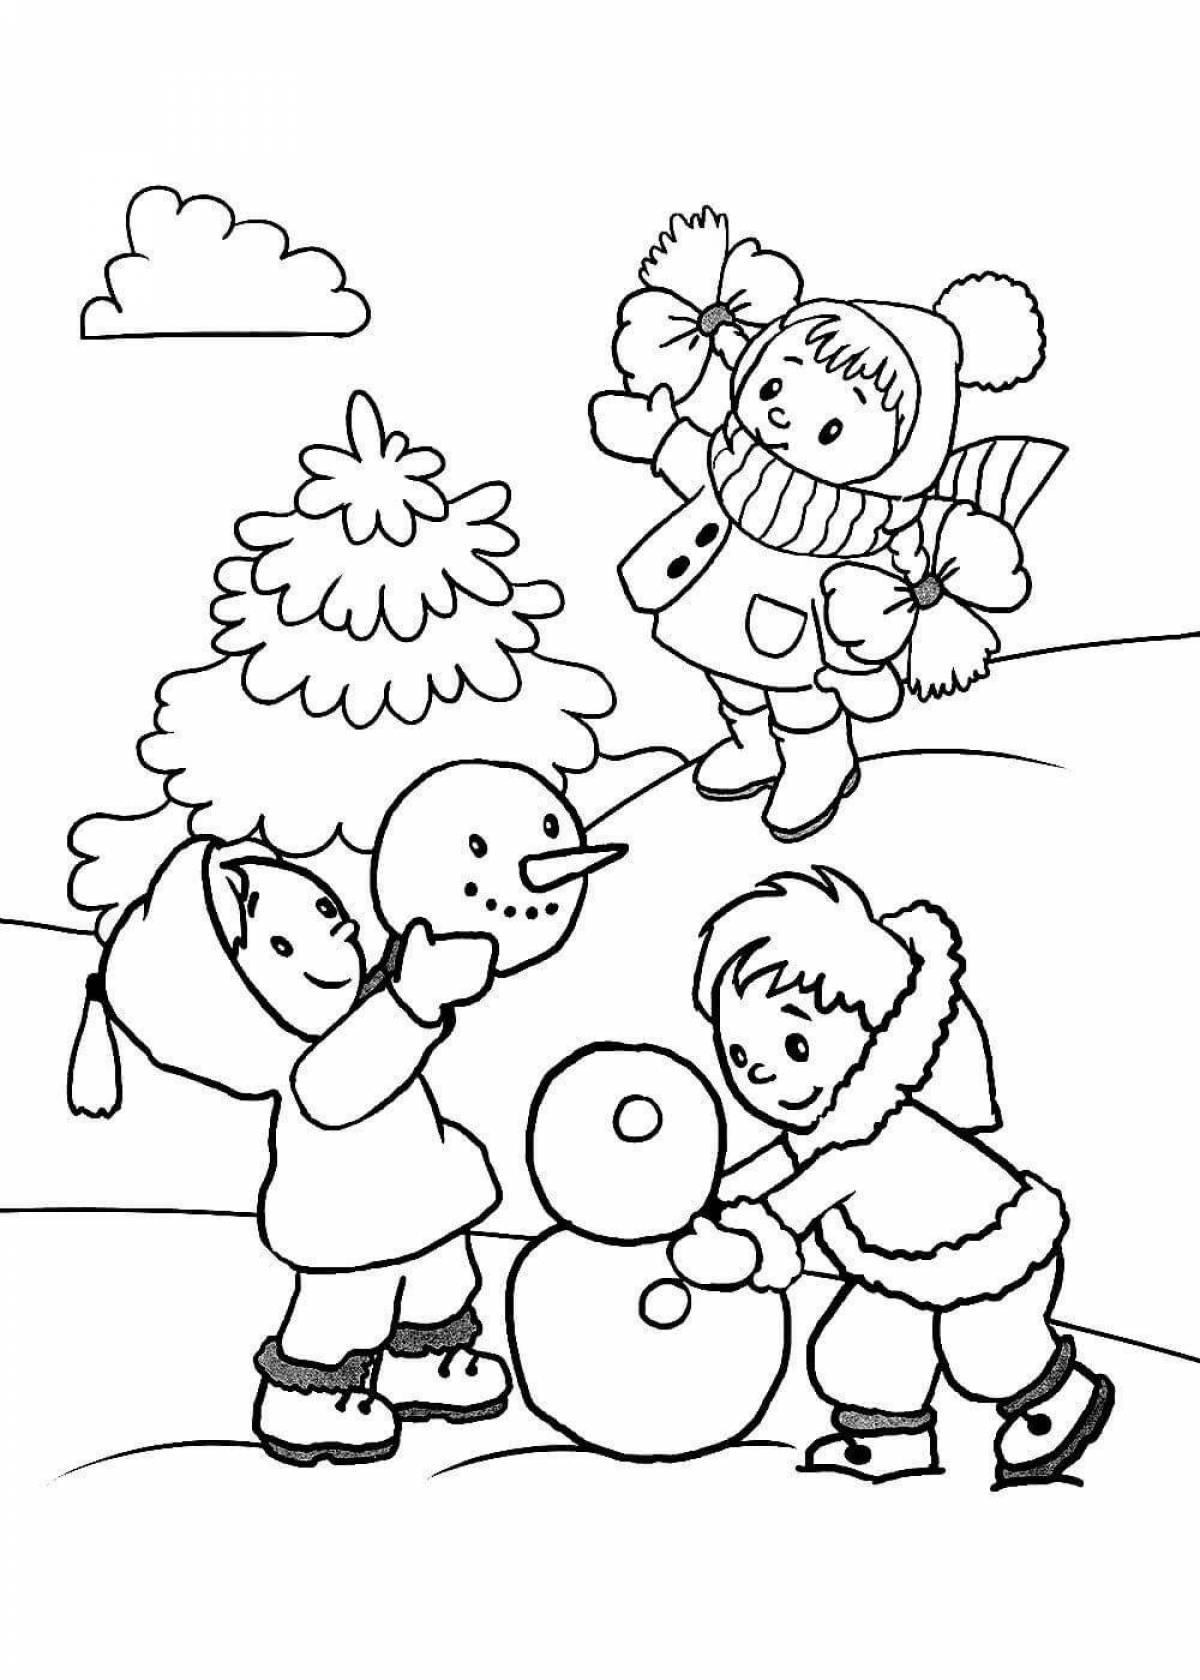 Playful winter coloring book for children 6-7 years old